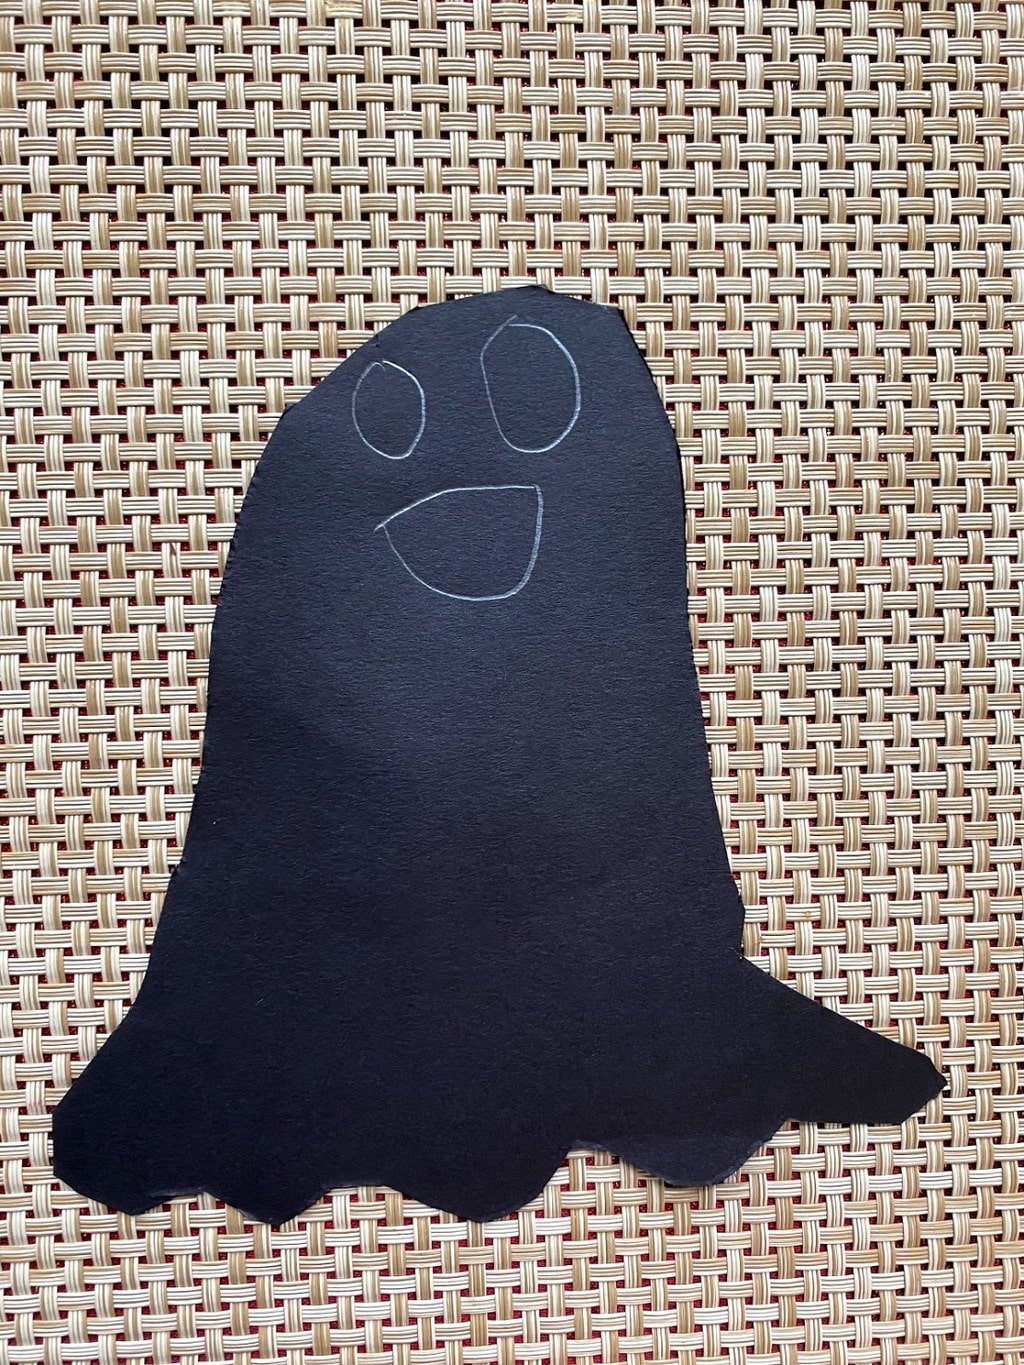 cutout ghost for Rice Ghost Craft.